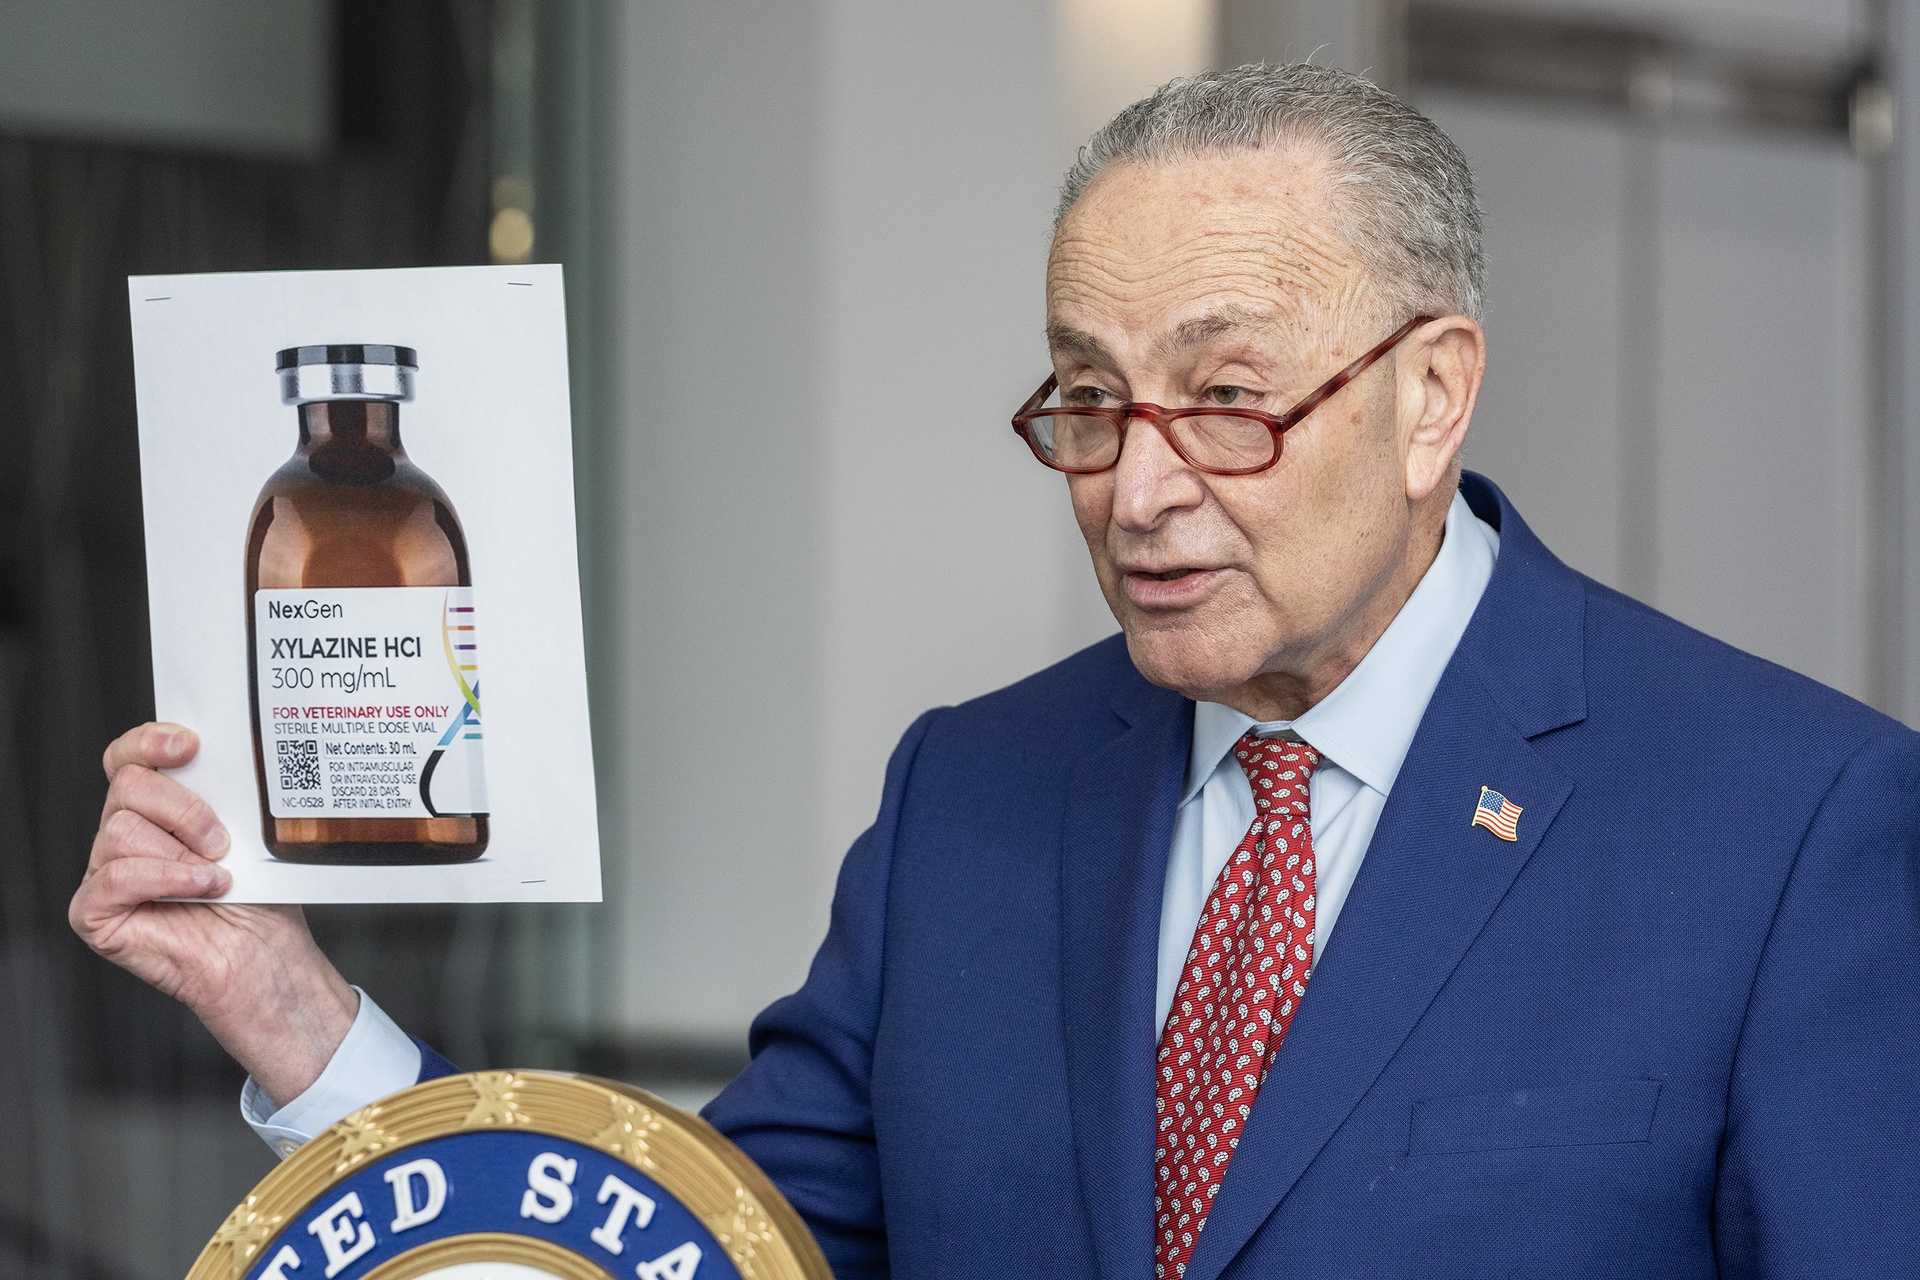 Senator Charles Schumer speaks while holding photo of bottle of drug Xylazine. The drug has become a major concern in the US and this 'public health threat has now expanded to the United Kingdom'.